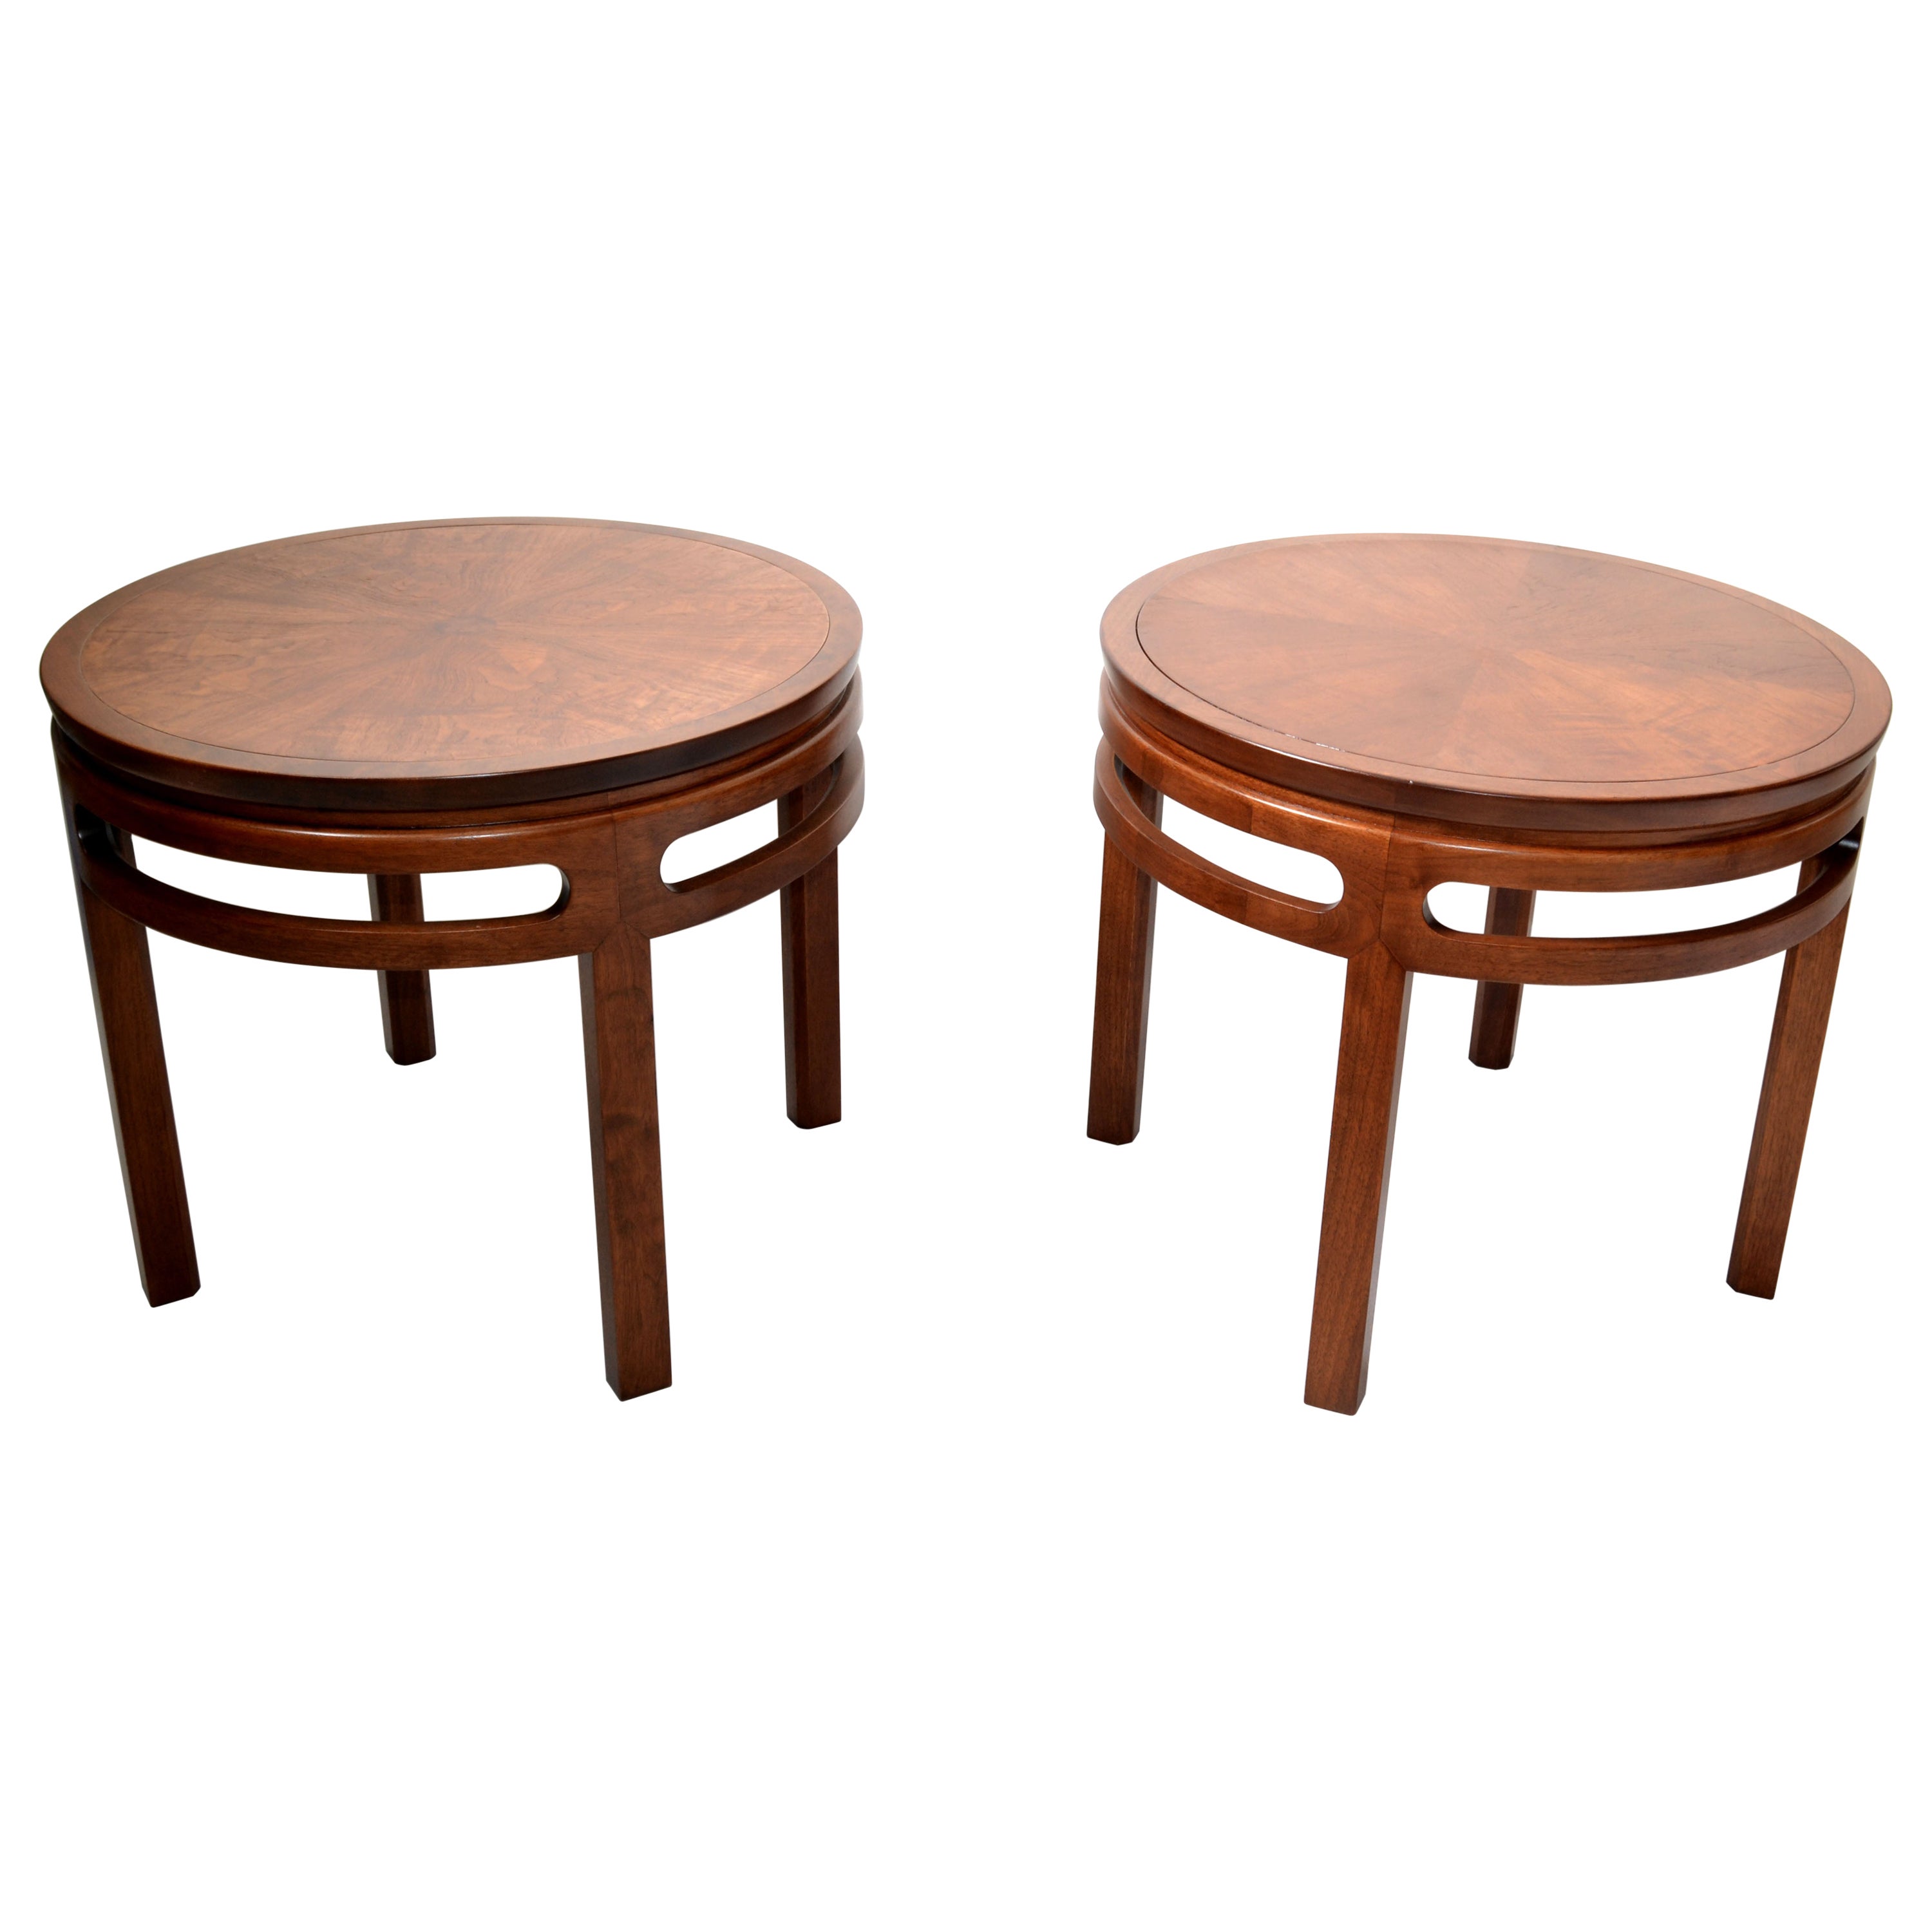 Asian Modern Far East Collection Round Table Michael Taylor Baker Furniture Pair